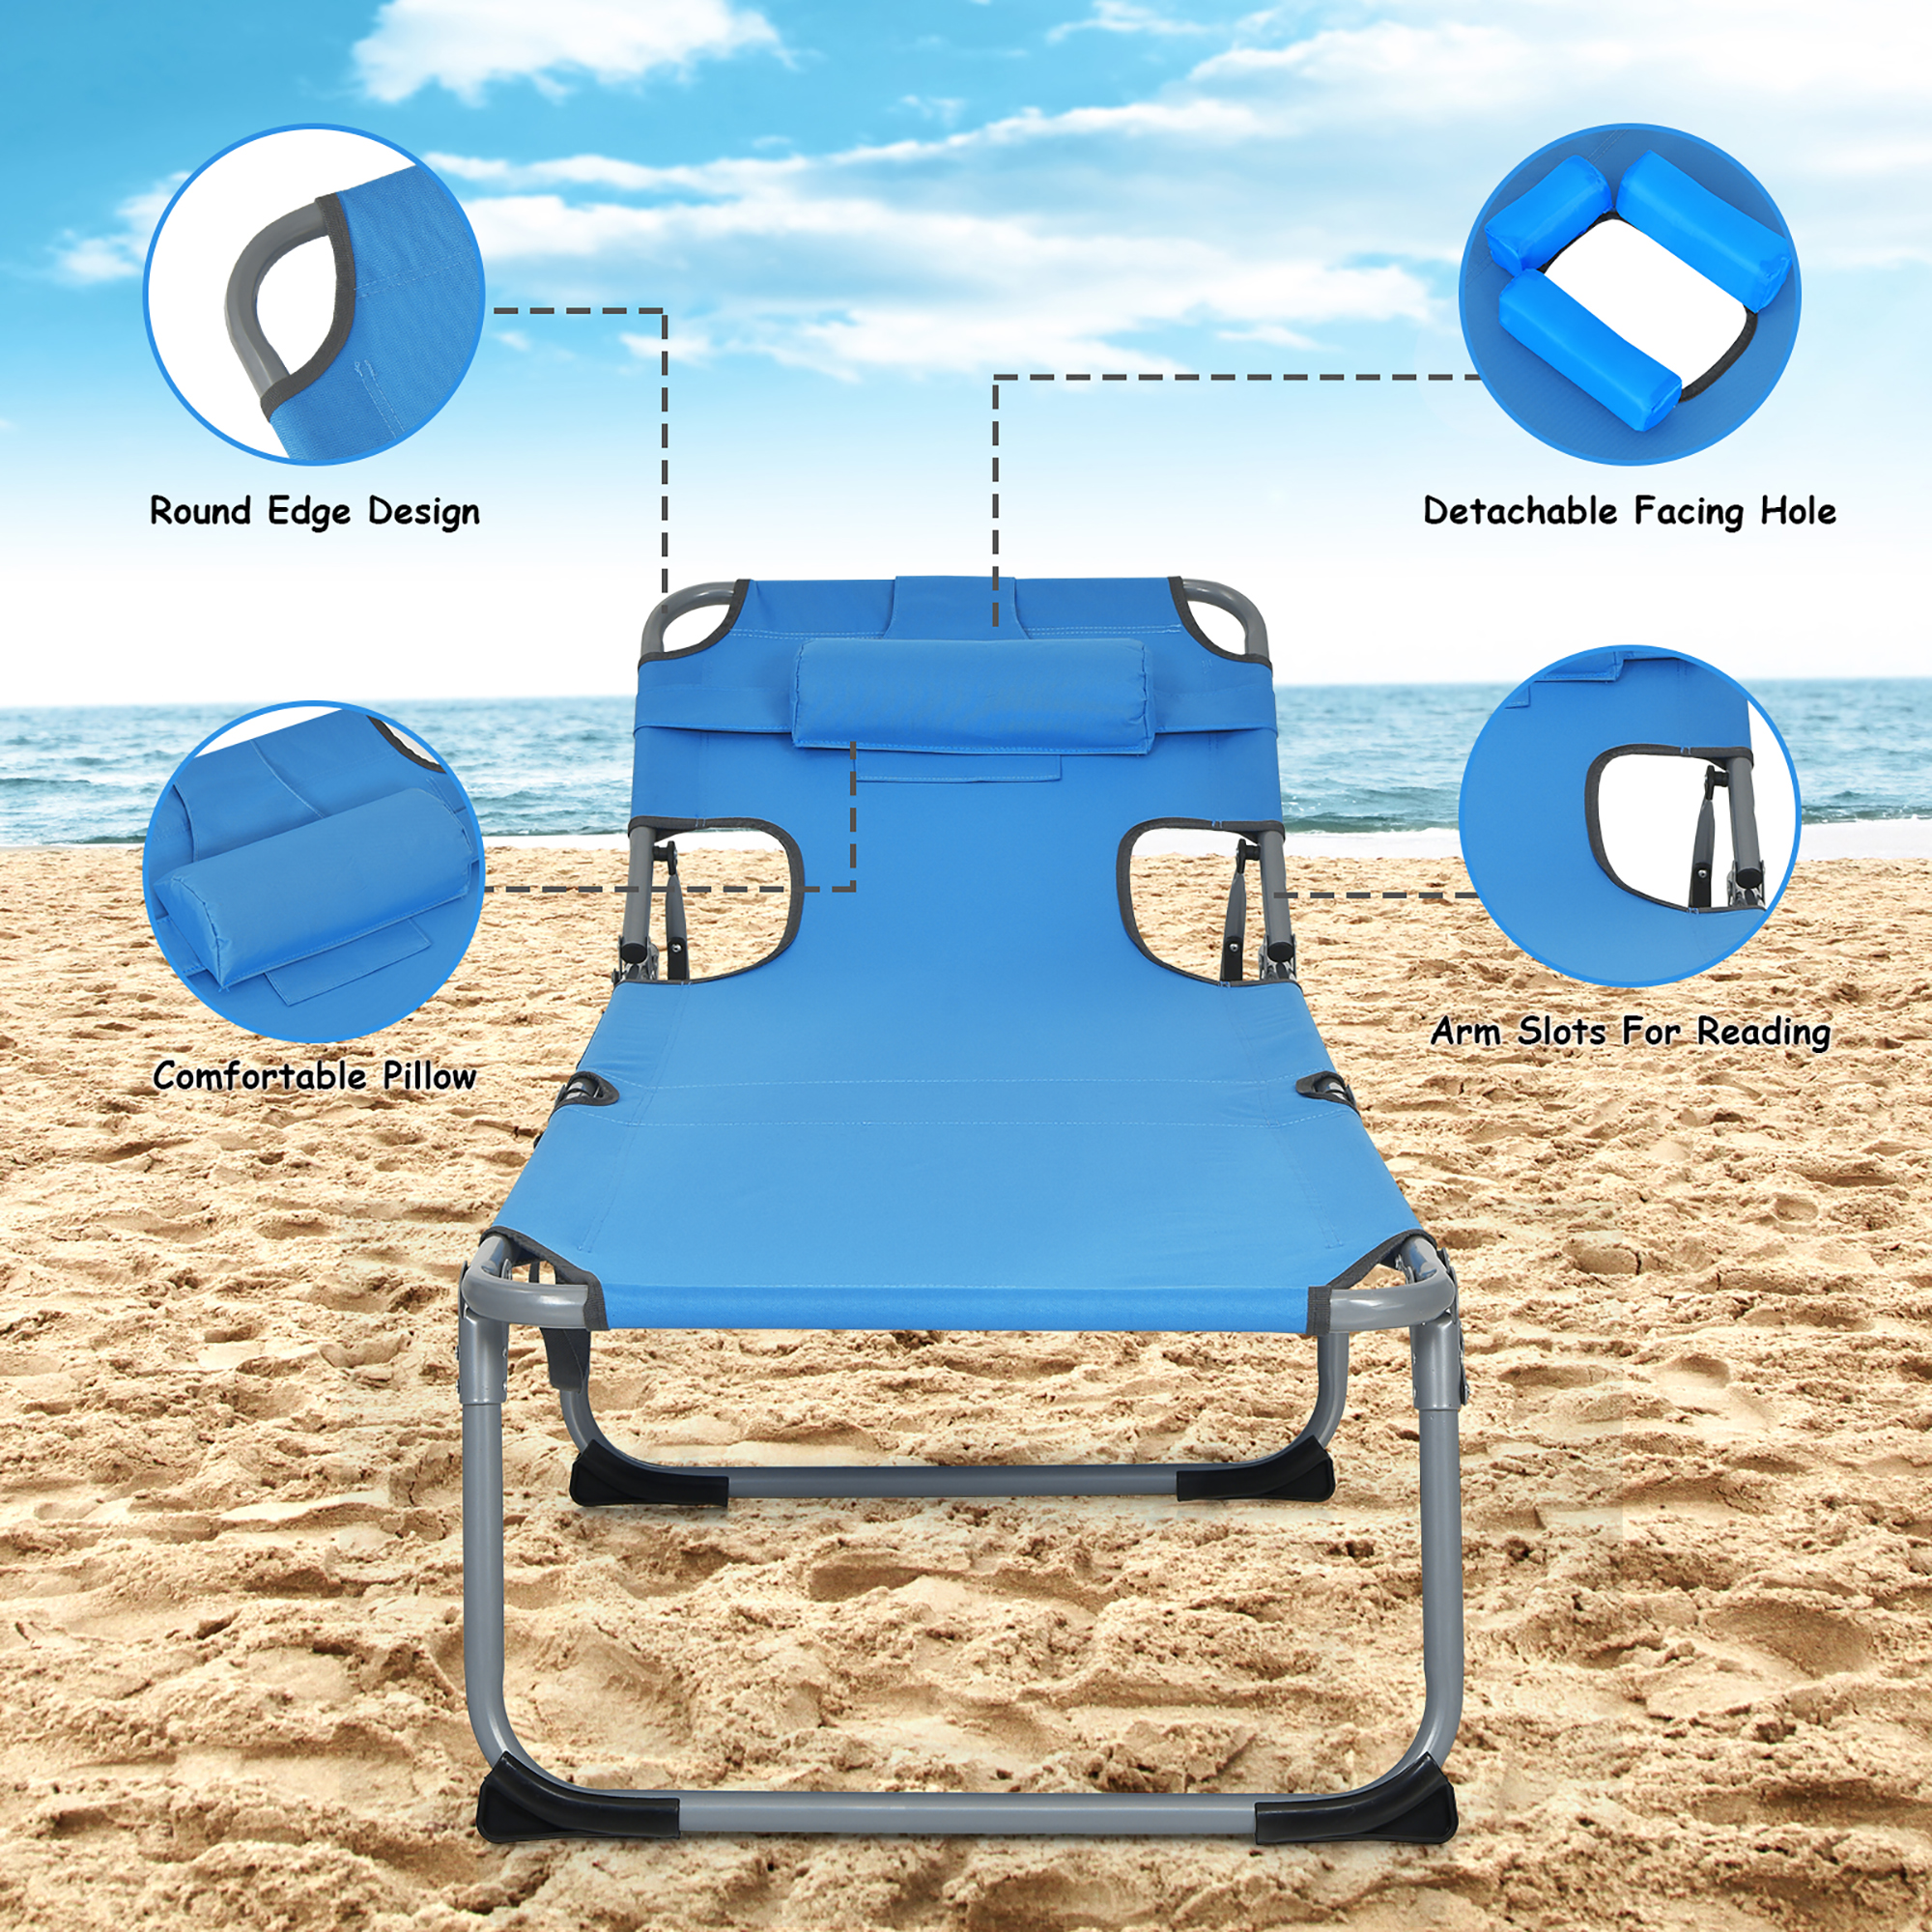 Goplus Outdoor Beach Lounge Chair Folding Chaise Lounge with Pillow Blue - image 3 of 8